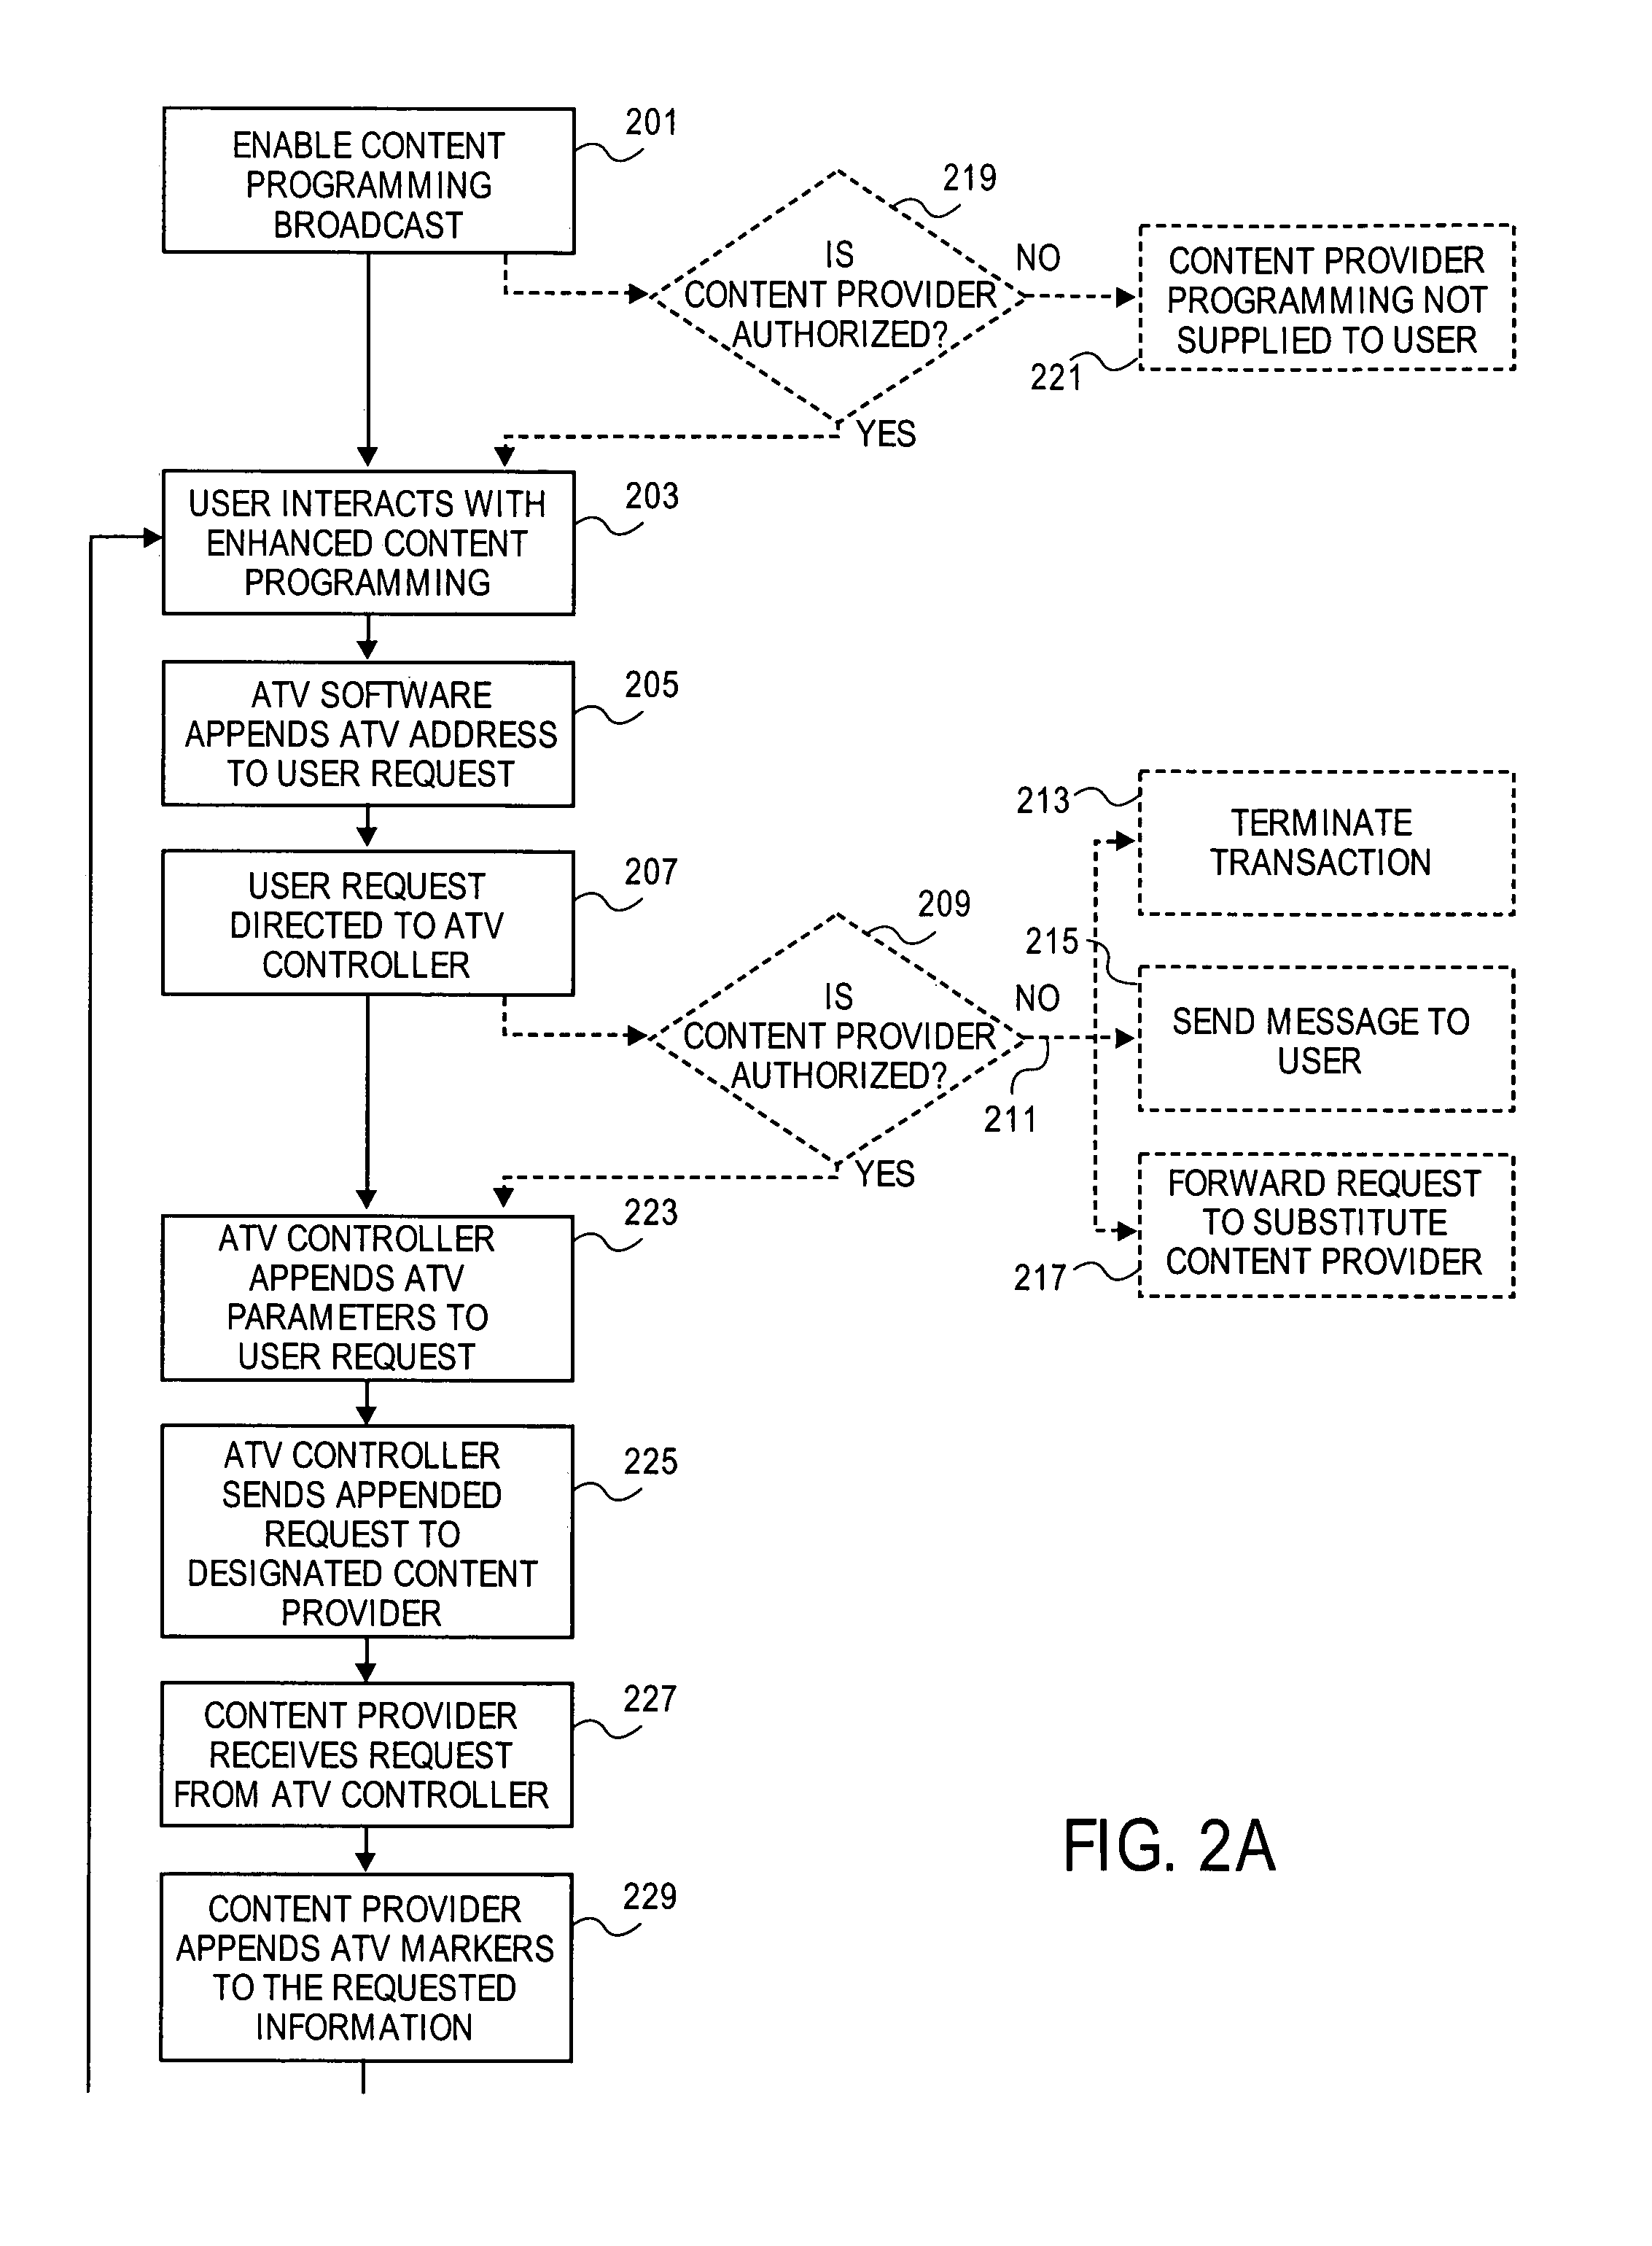 Method and system for controlling and auditing content/service systems